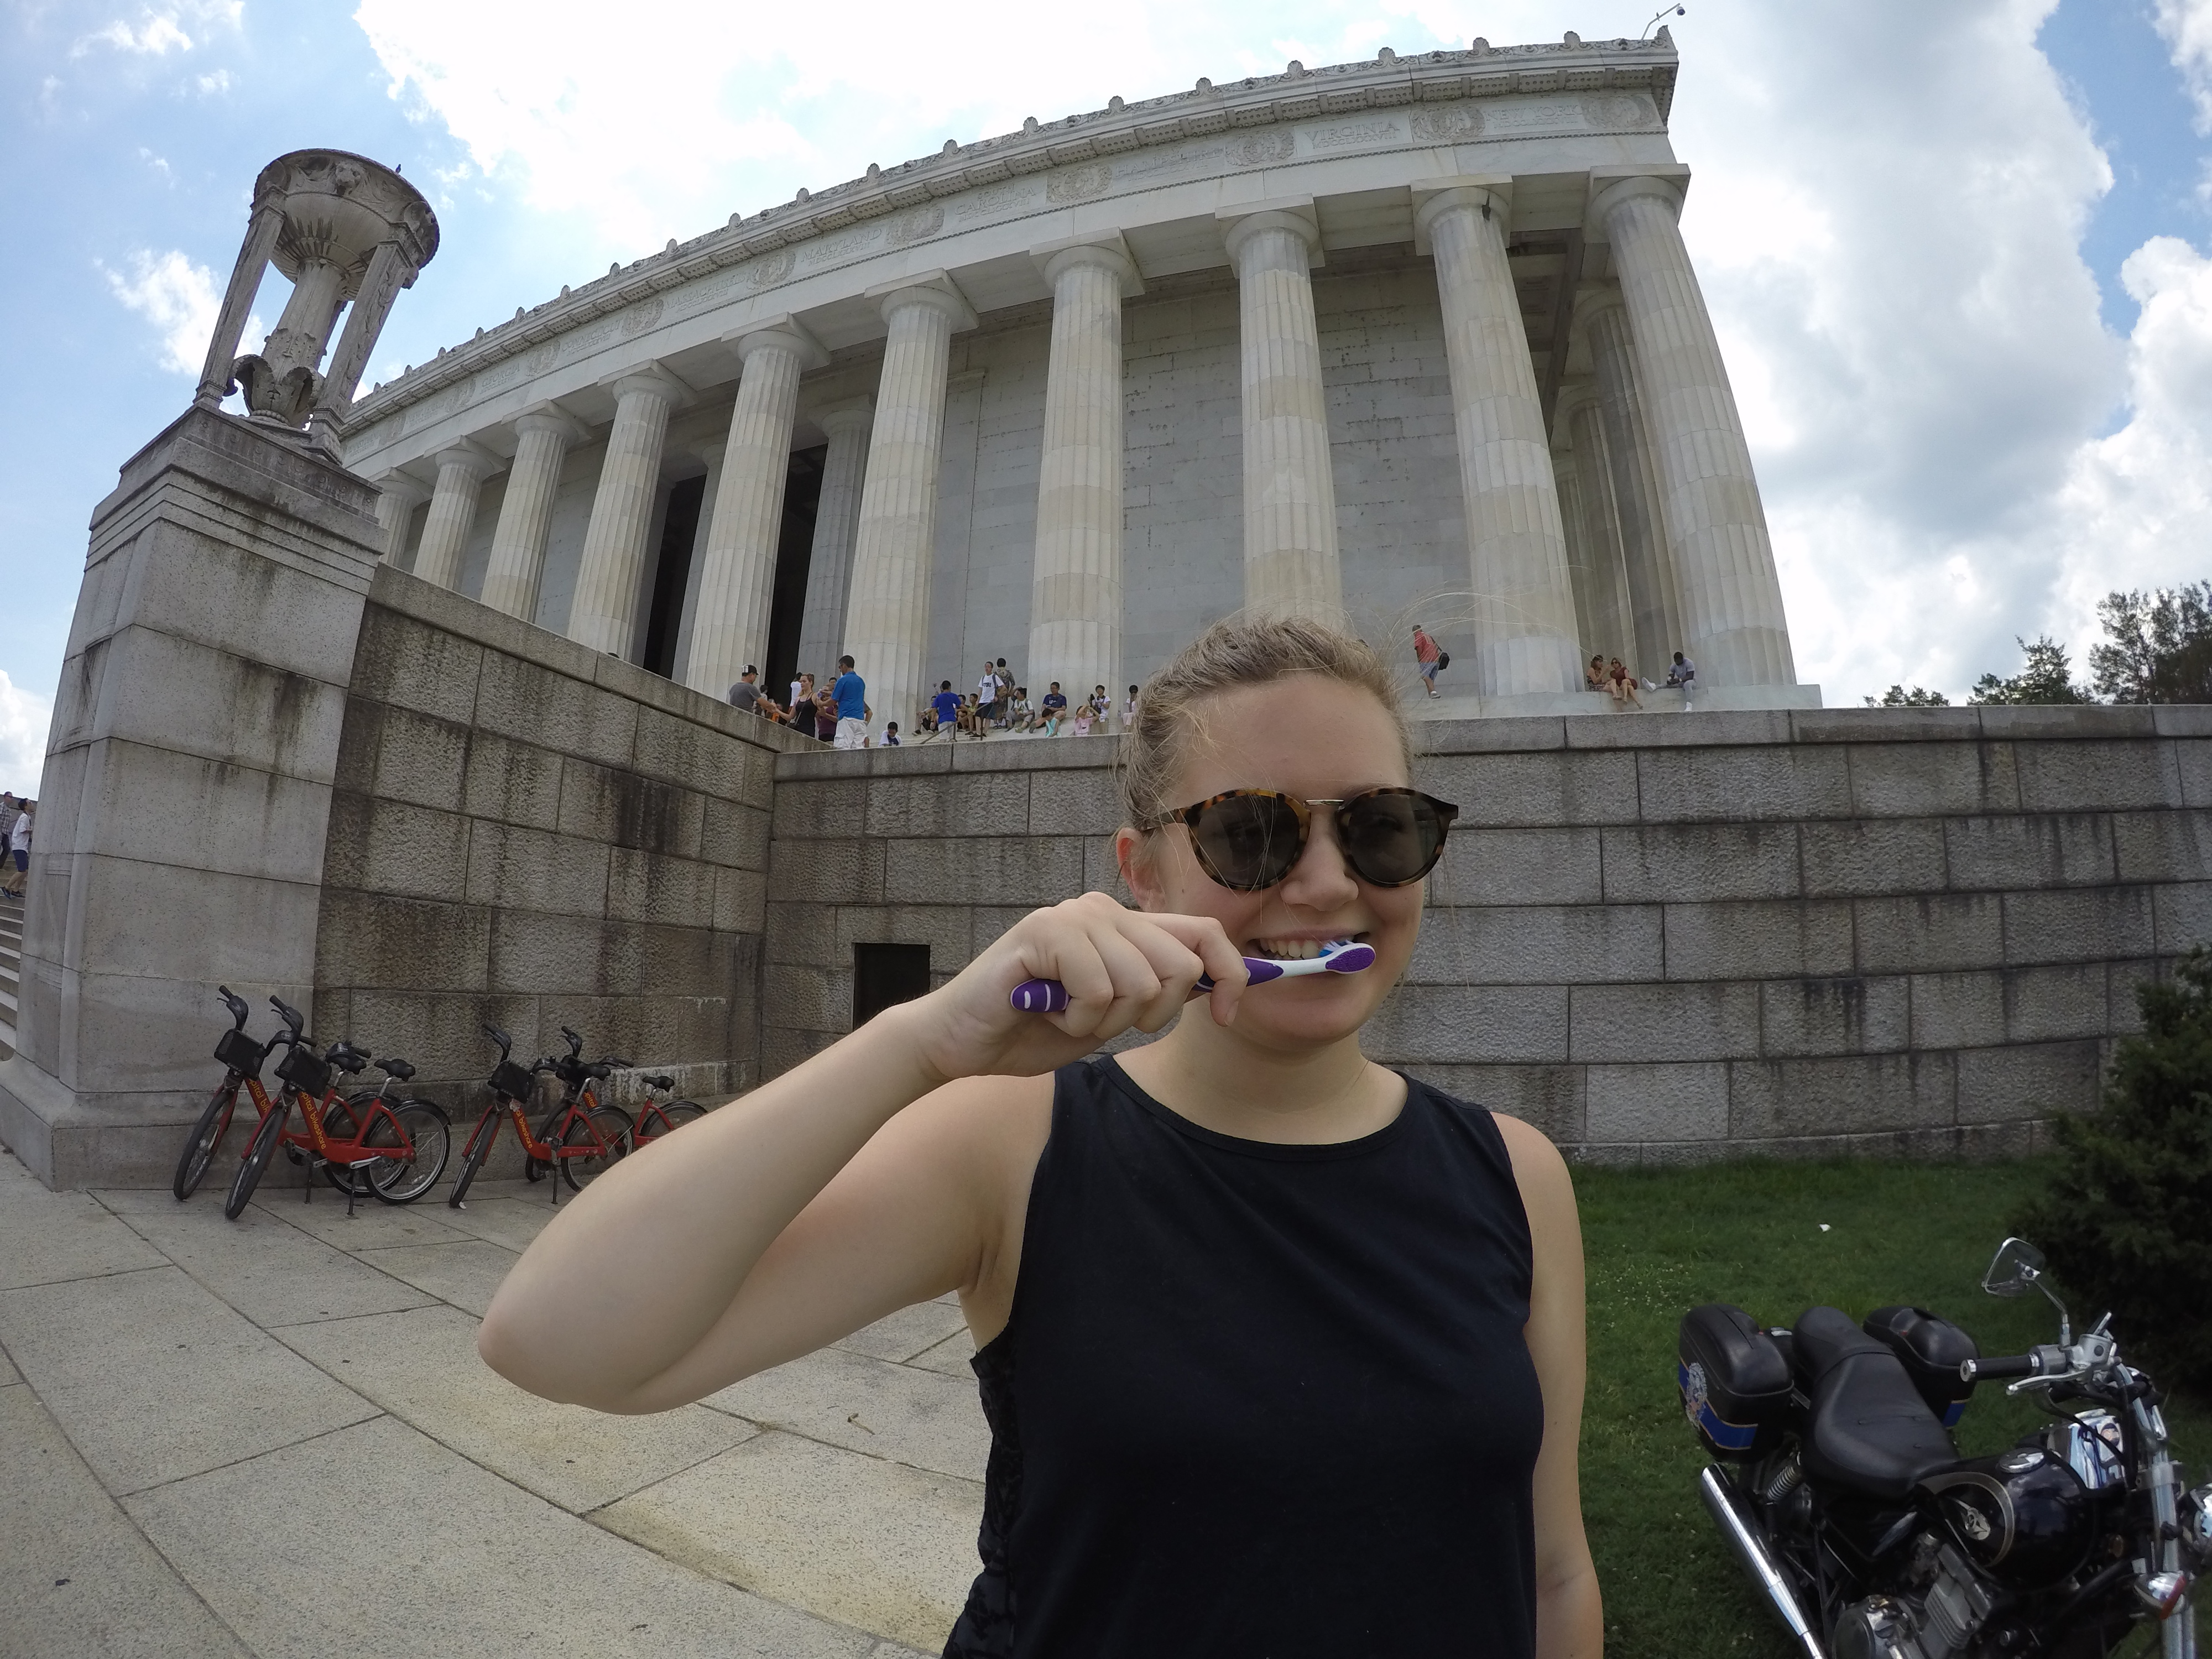 Toothbrush Challenge at the Lincoln Memorial